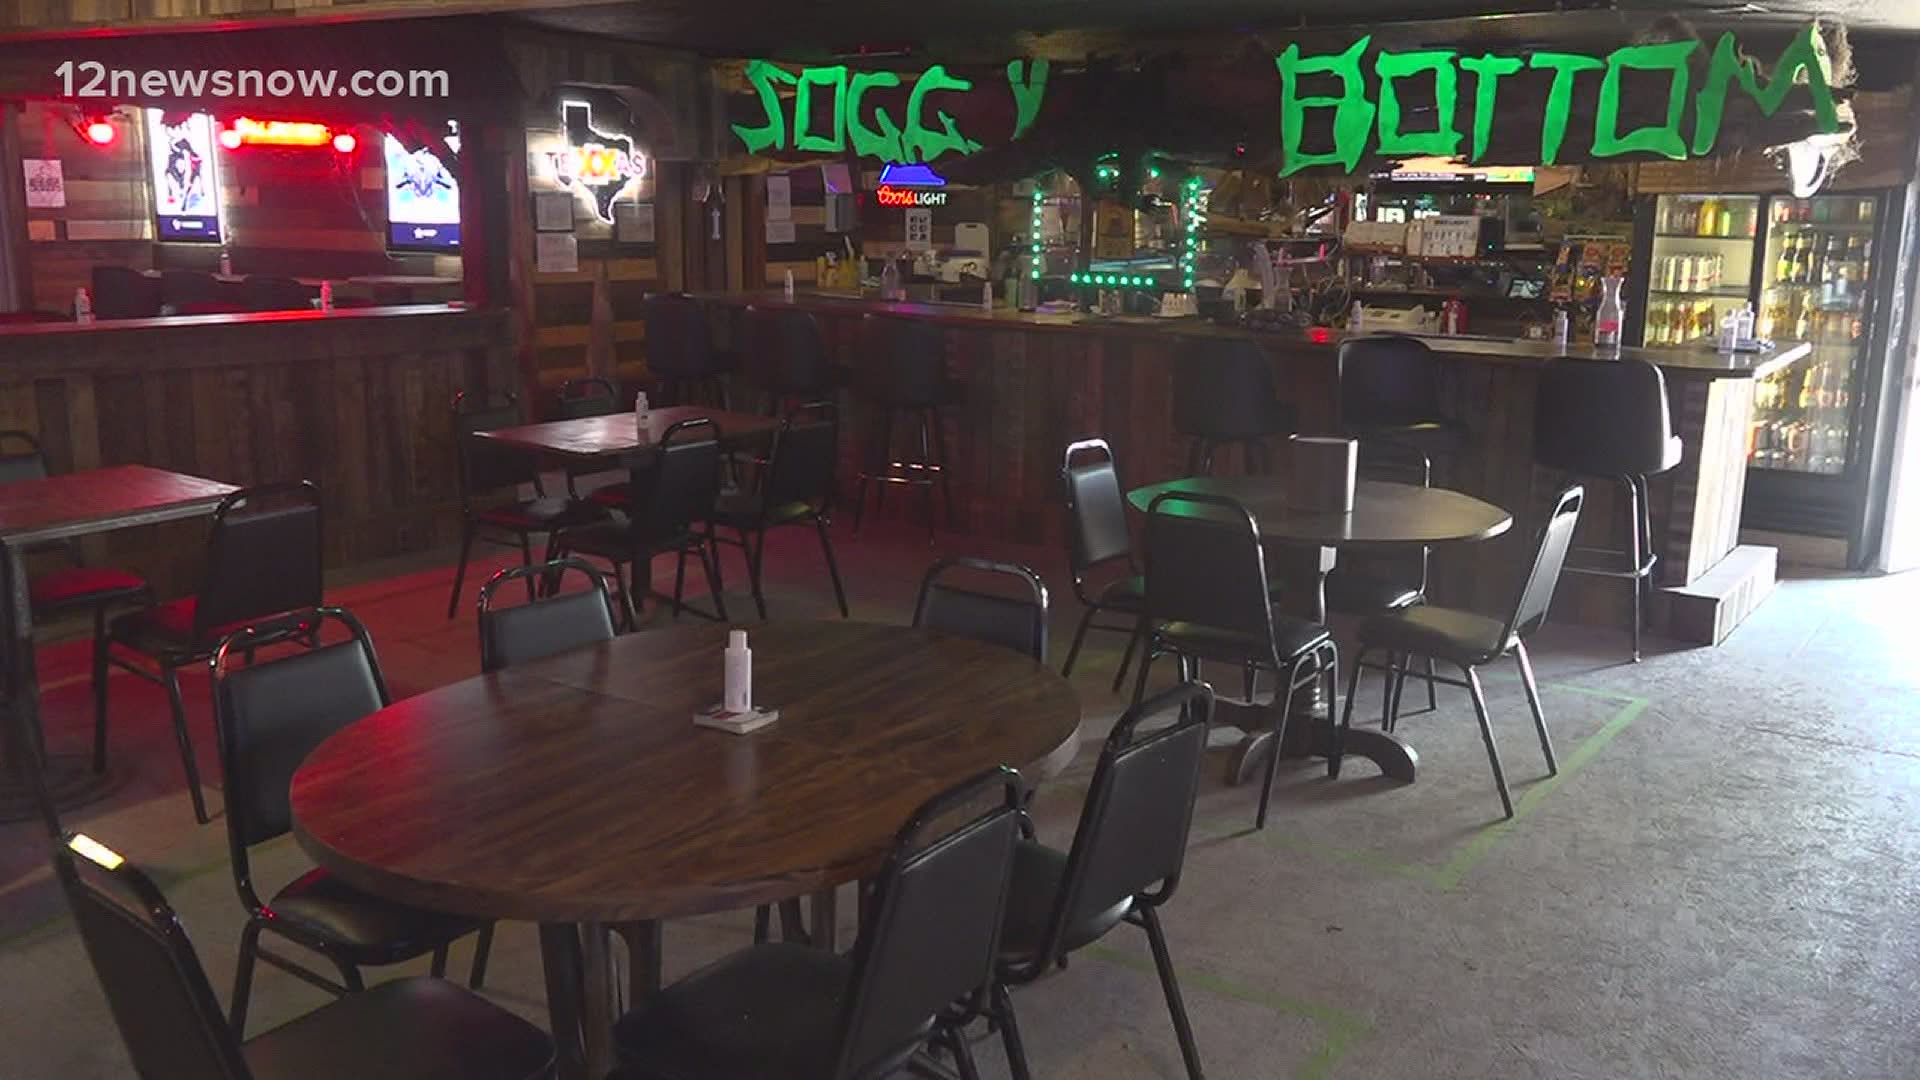 Texas bars can reopen at 50% capacity on Wednesday if the county has opted in.